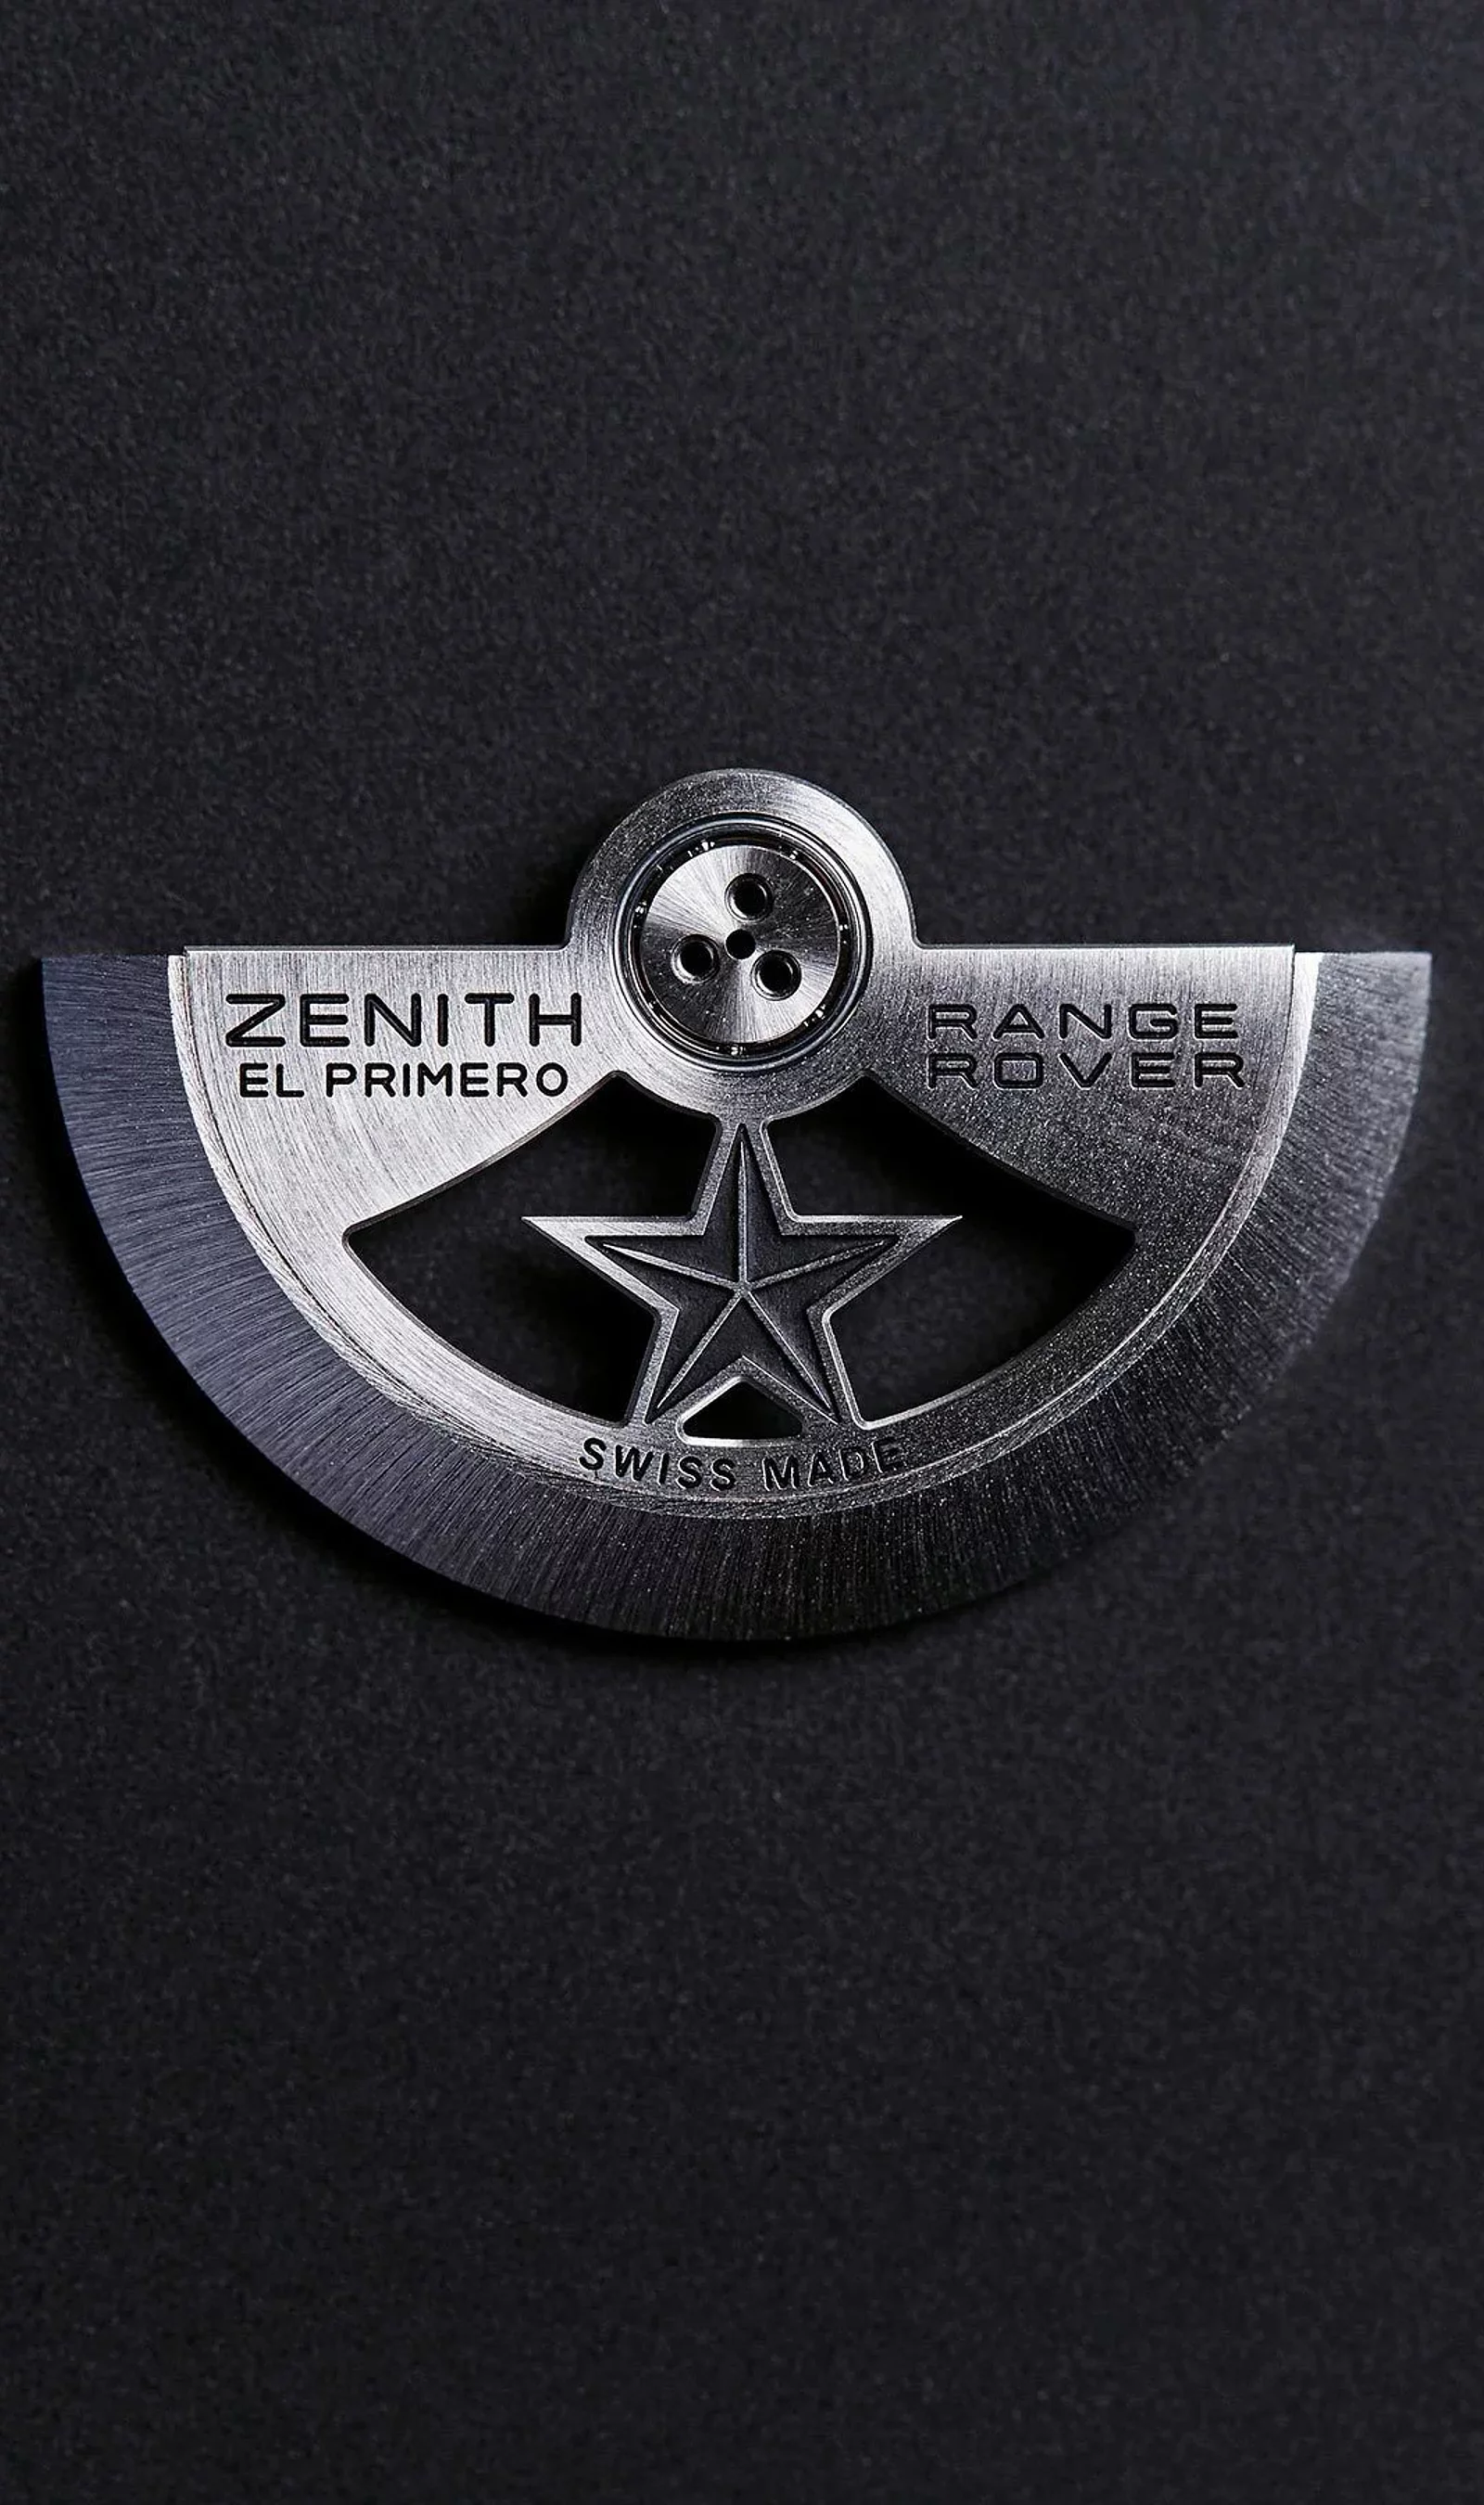 RANGE ROVER AND ZENITH WATCHES –<br>SHARED MOMENTS IN HISTORY